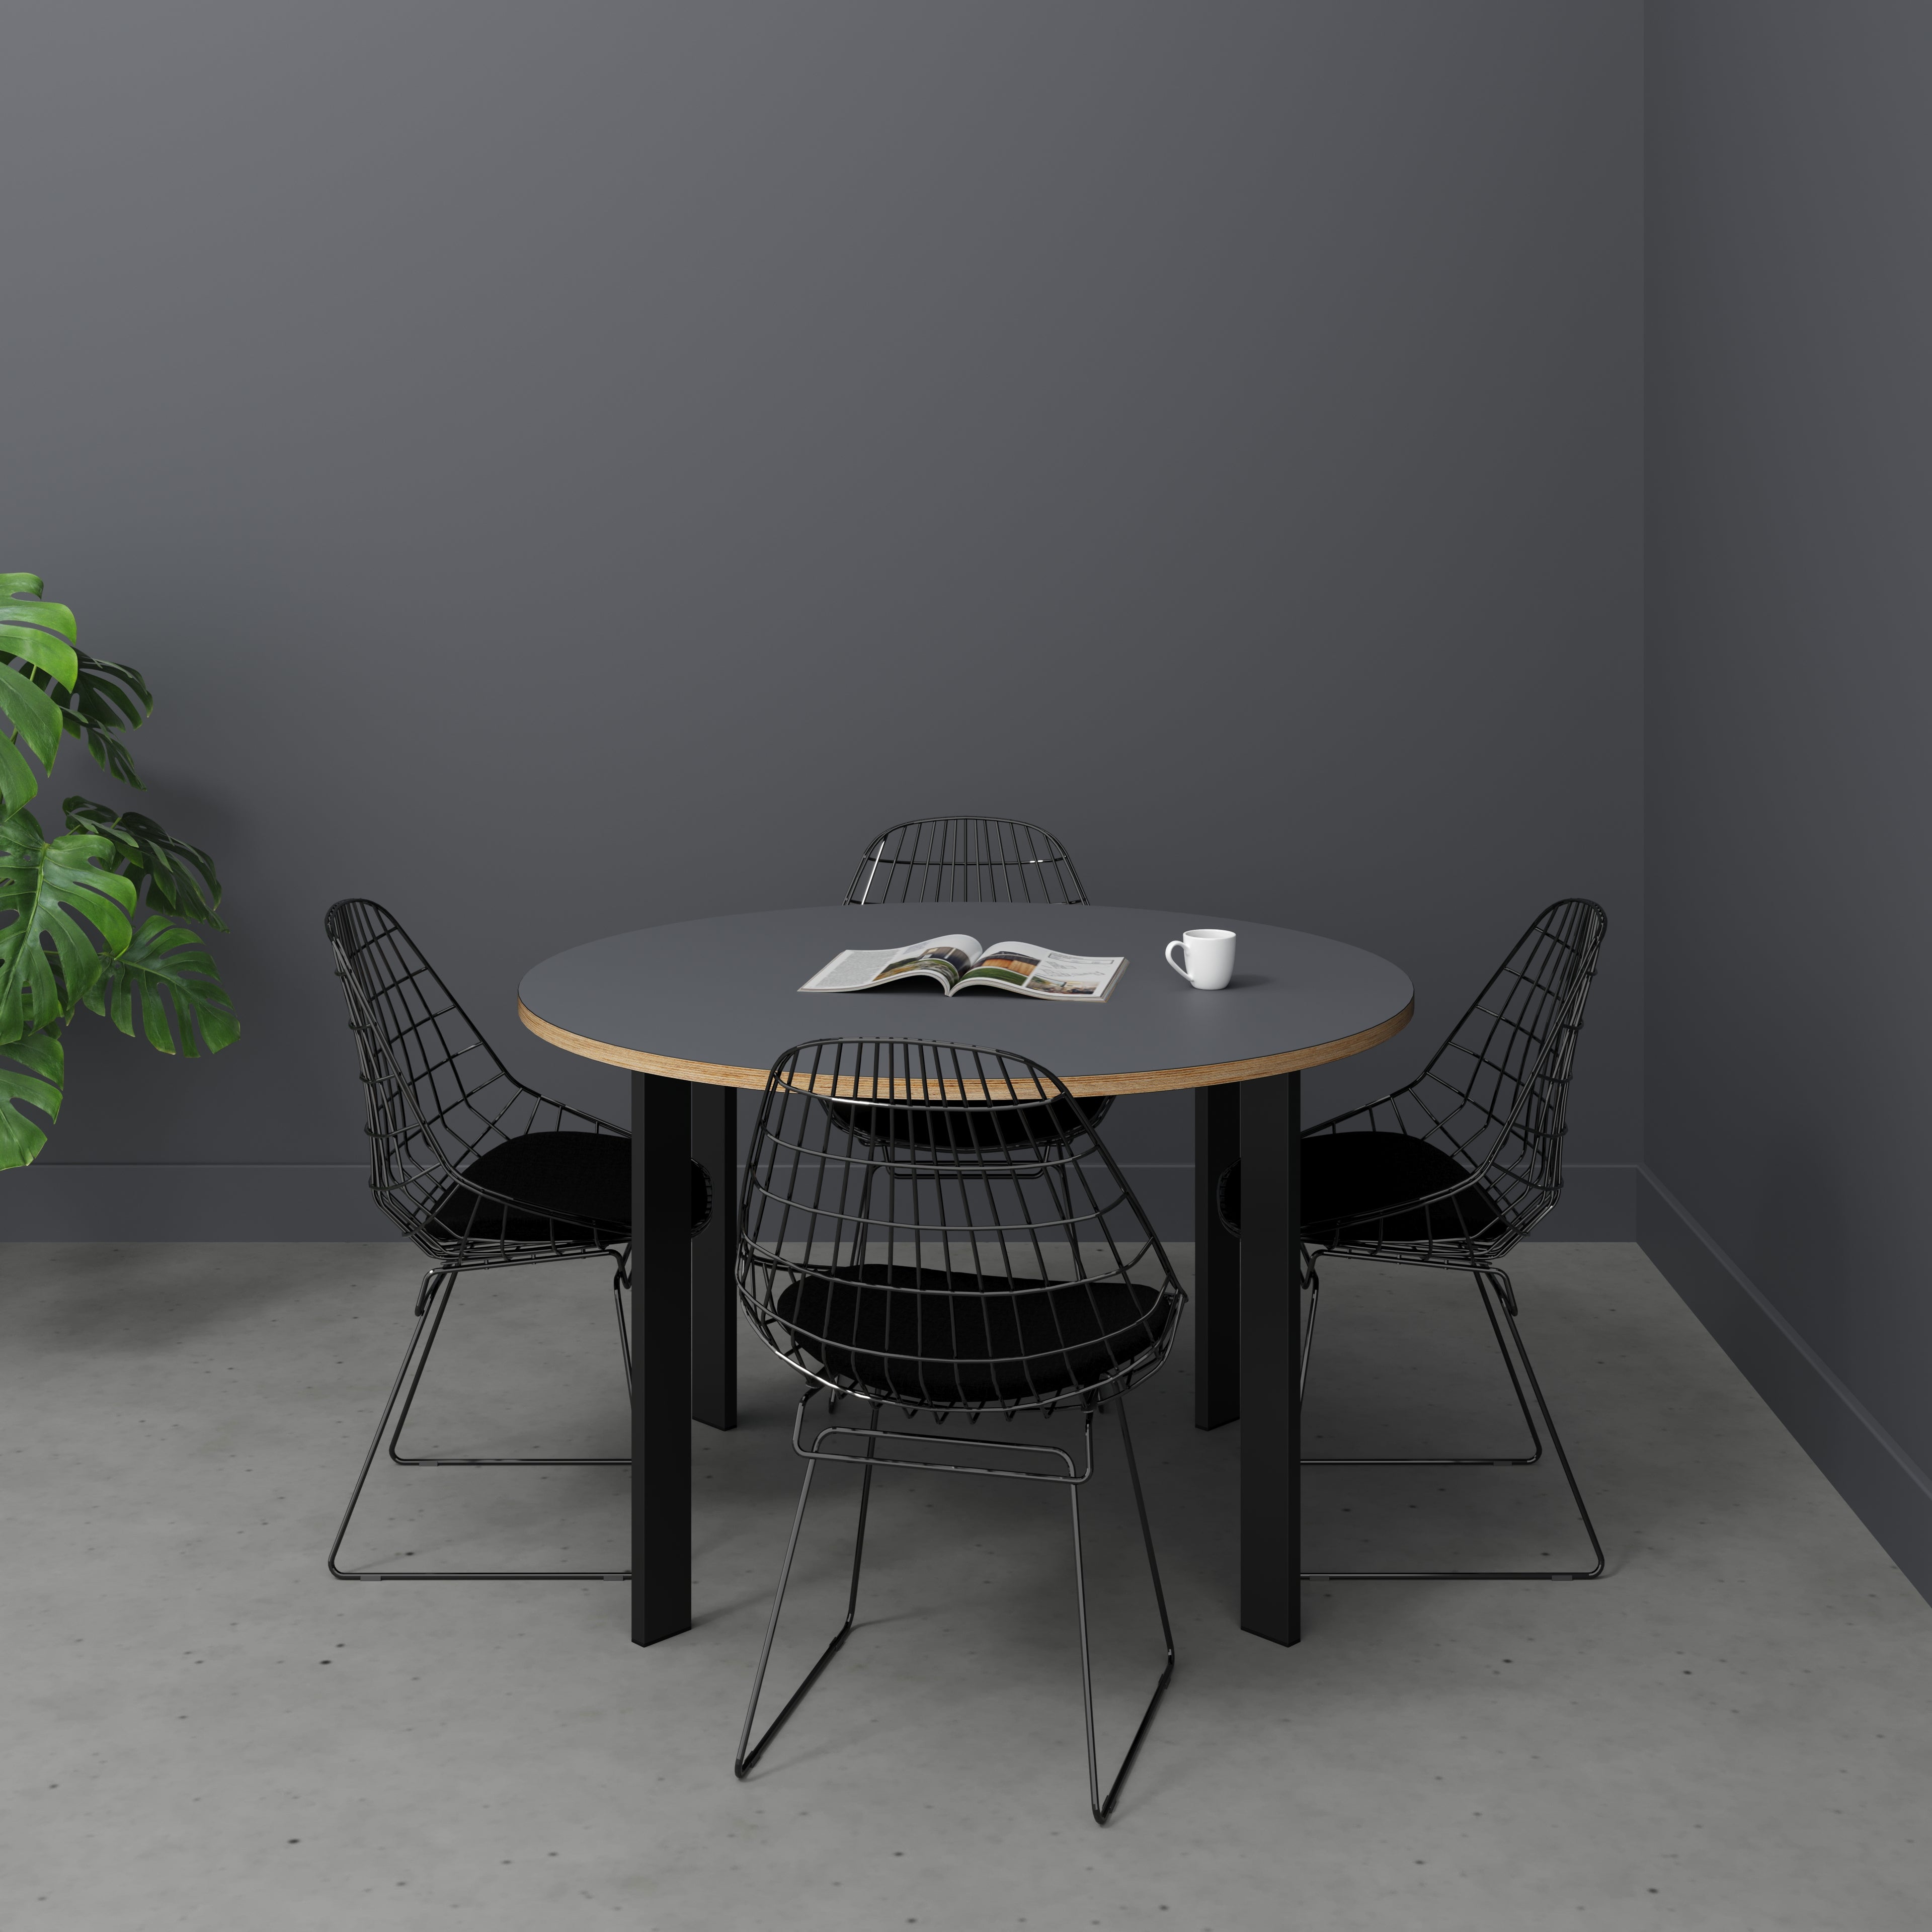 Round Table with Black Rectangular Single Pin Legs - Formica Tornado Grey - 1200(dia) x 750(h)